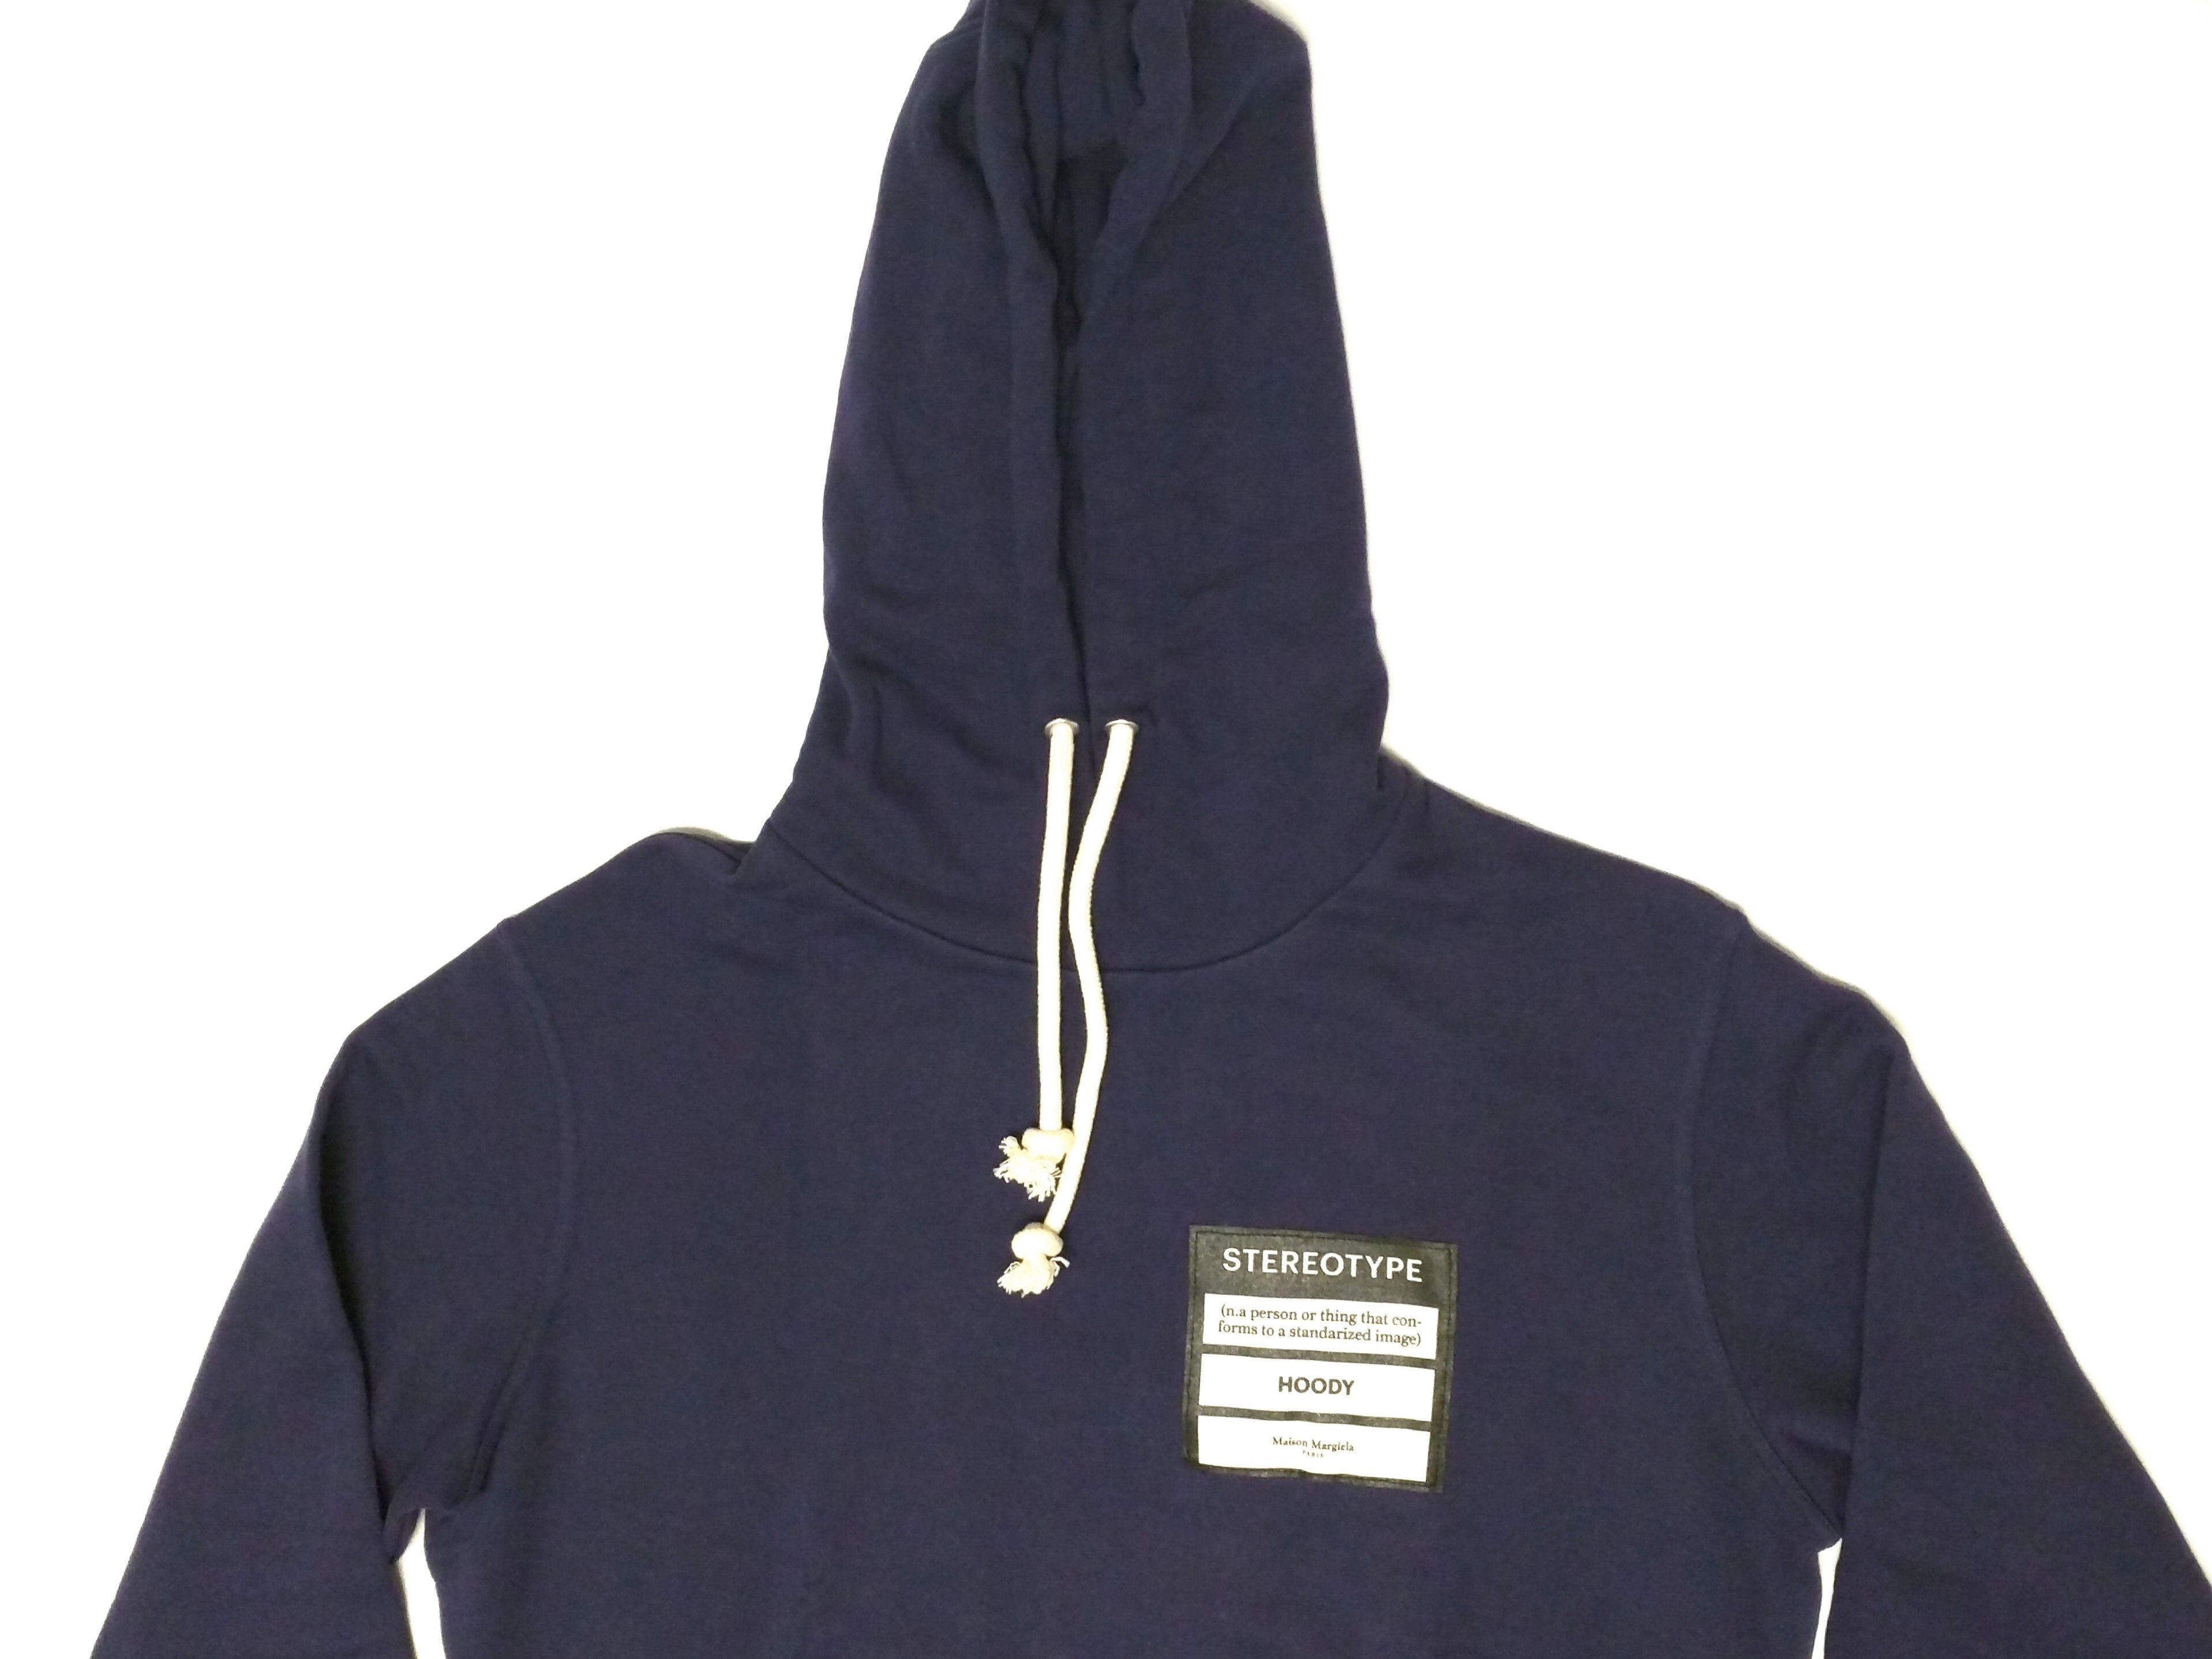 Maison Margiela Stereotype Hoodie Navy Blue 48 MMM Pullover Size US L / EU 52-54 / 3 - 2 Preview